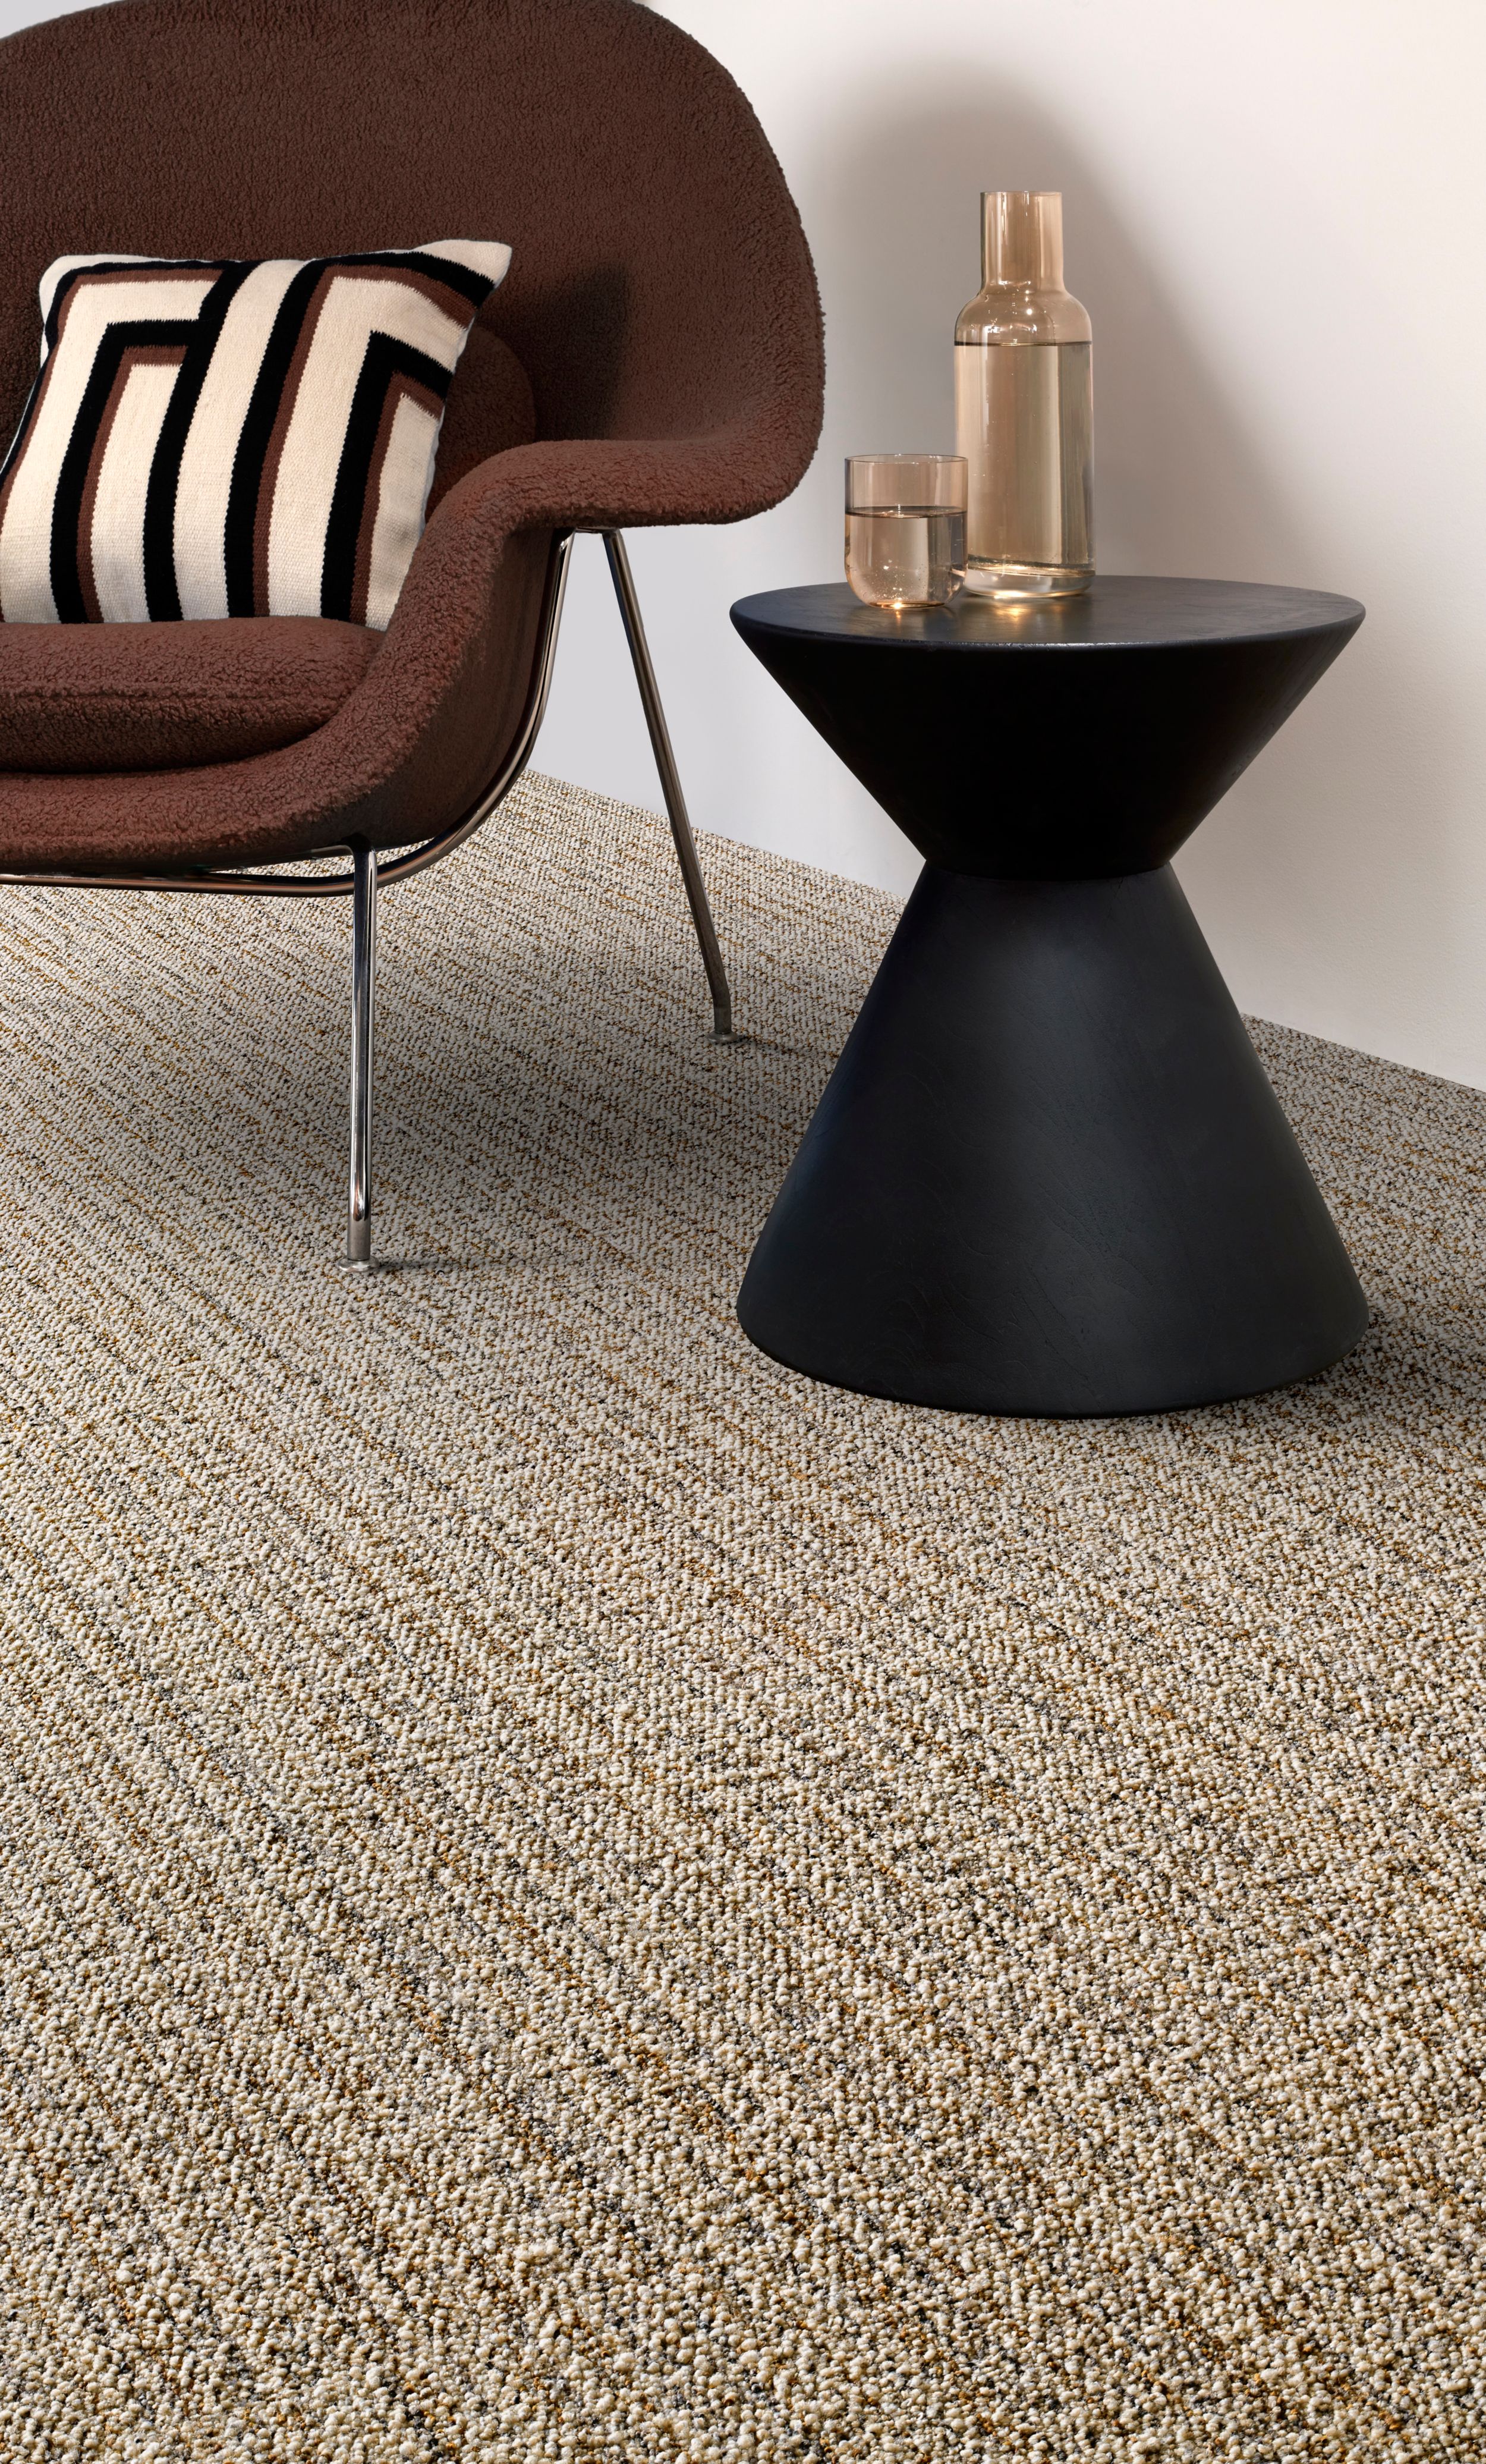 Interface E616 plank carpet tile in corporate lobby or private office numéro d’image 2